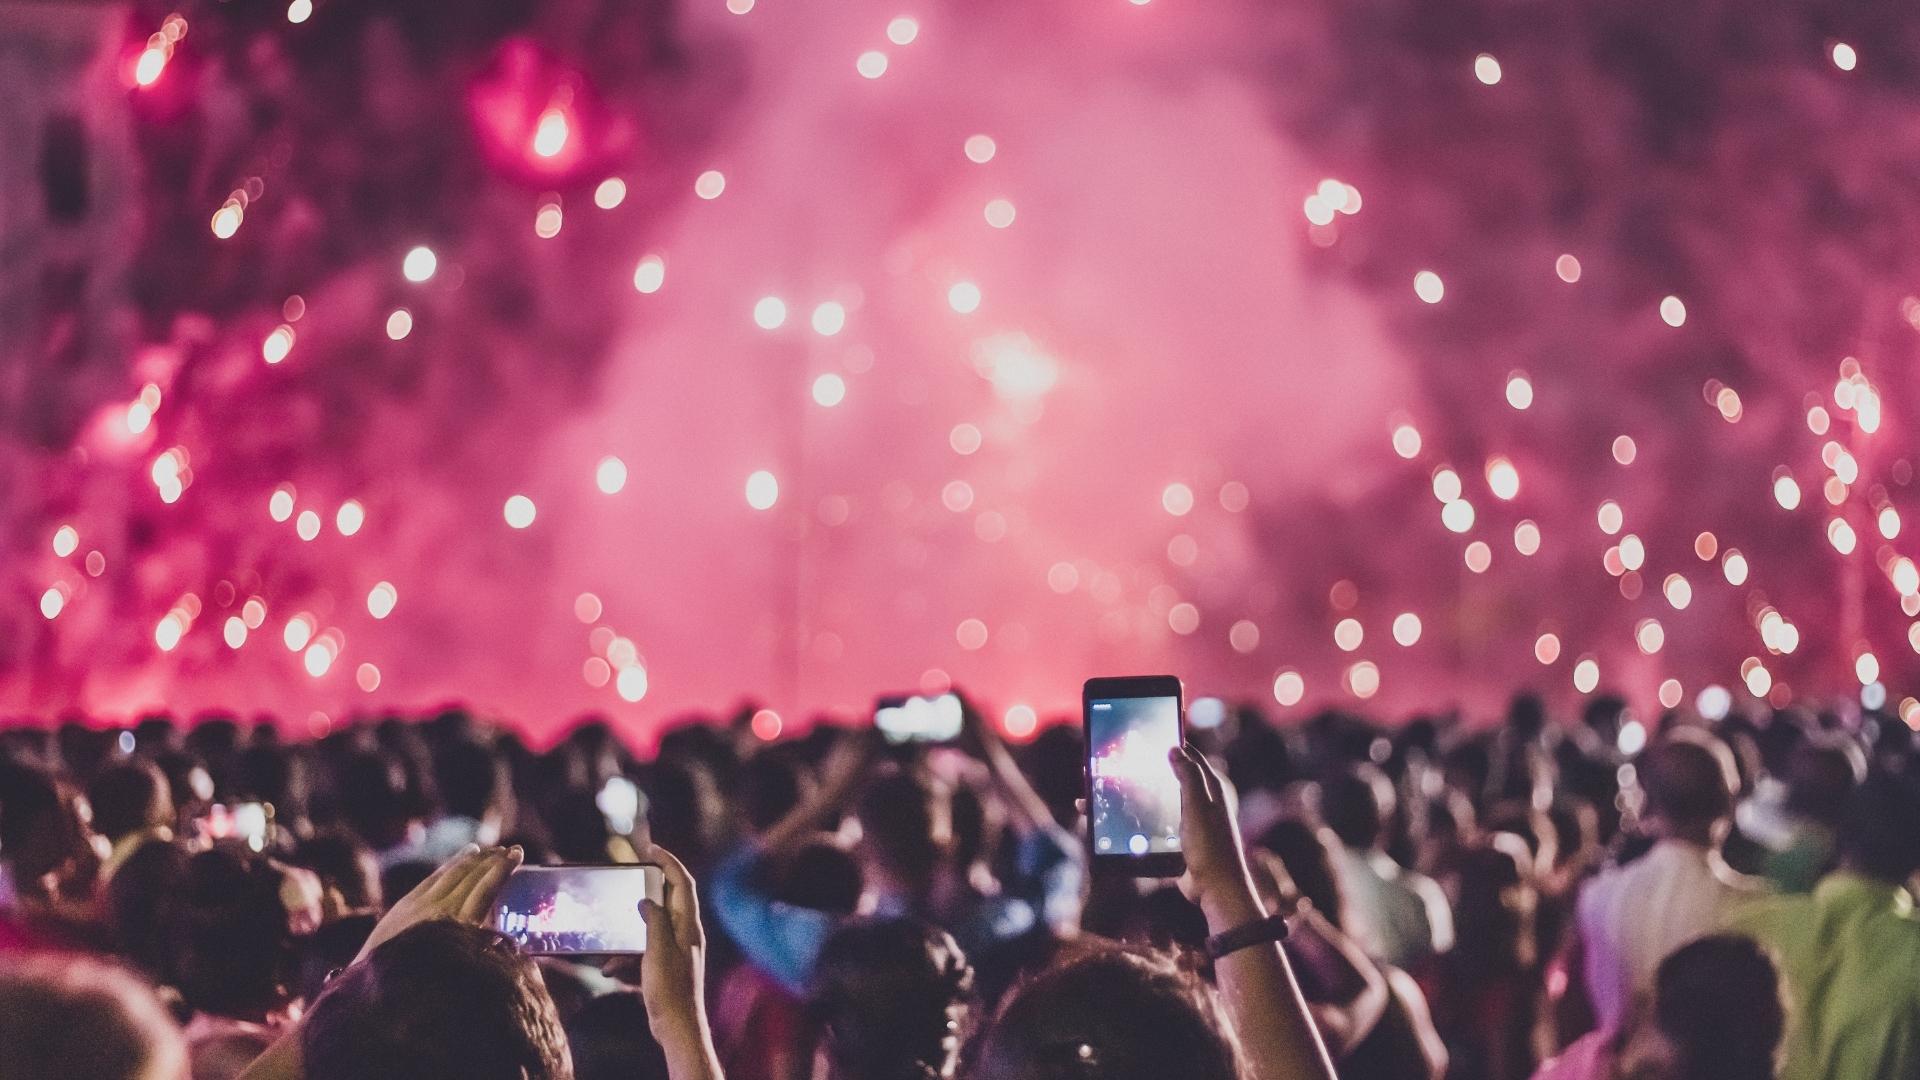 How to Take a Picture of Fireworks